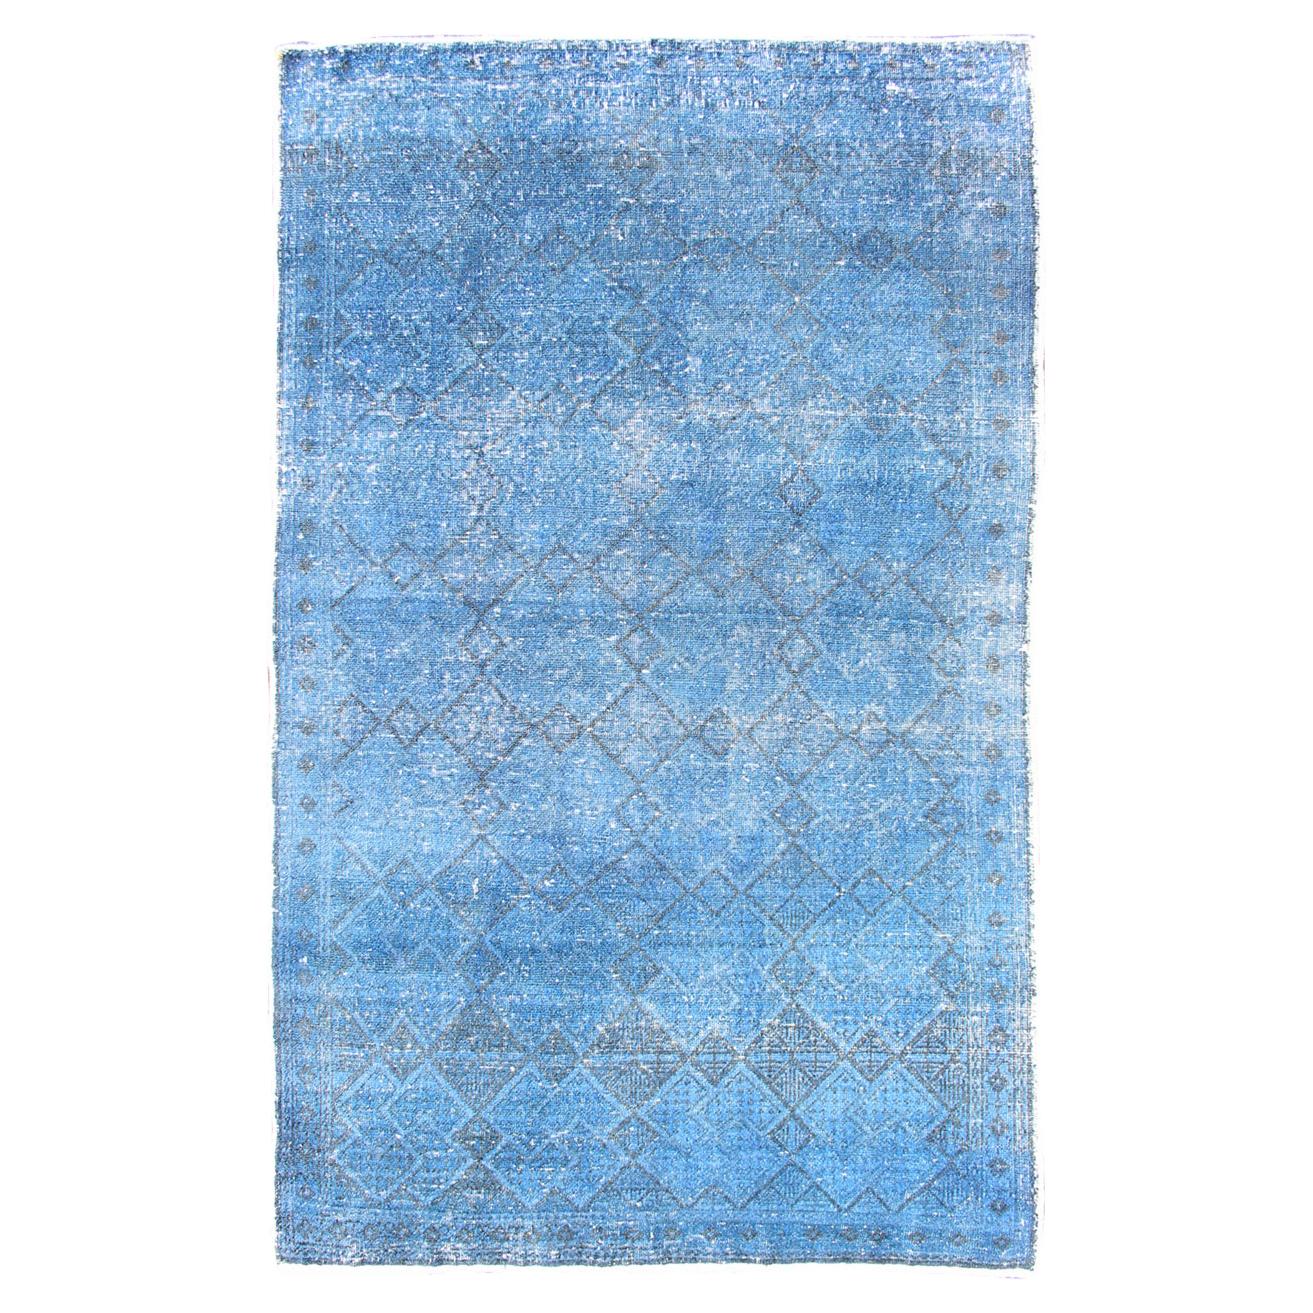 Vintage Turkish Konya Rug Over-Dyed in Blue Color with All-Over Diamond Design